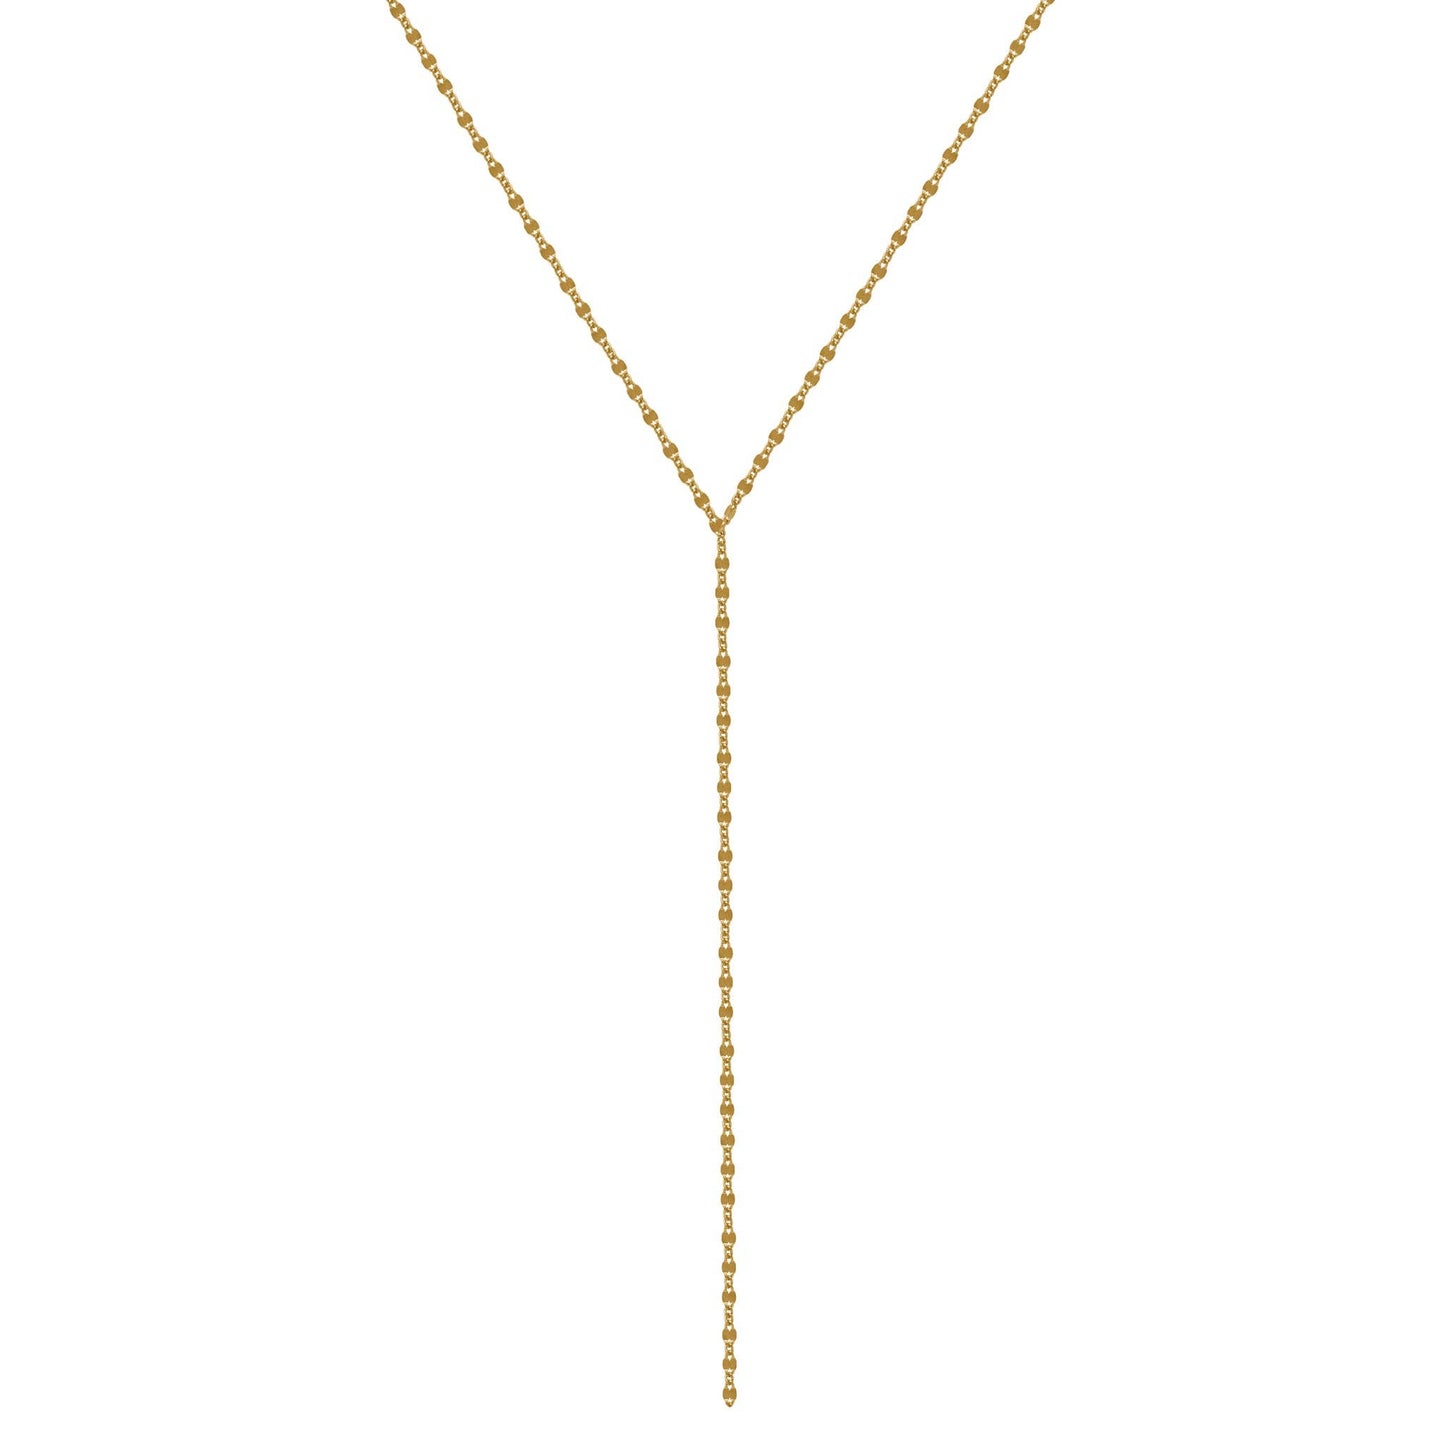 Isla necklace - dapped chain lariat necklace: 16" + 1.5" ext